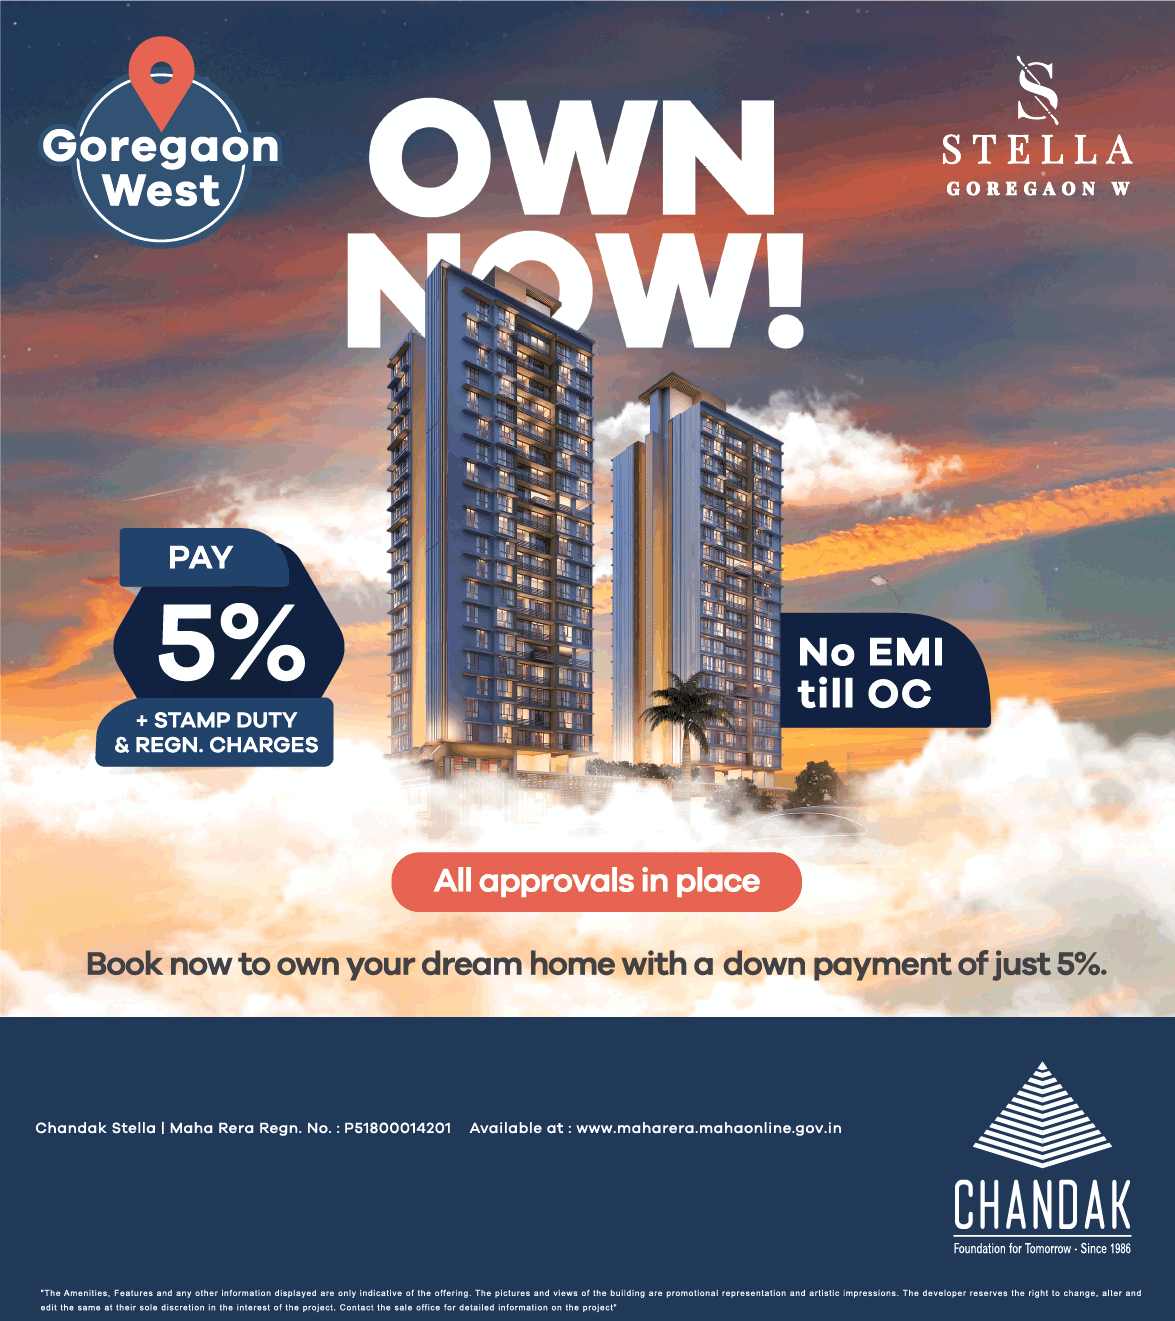 Book your dream home with a down payment of just 5% at Chandak Stella in Mumbai